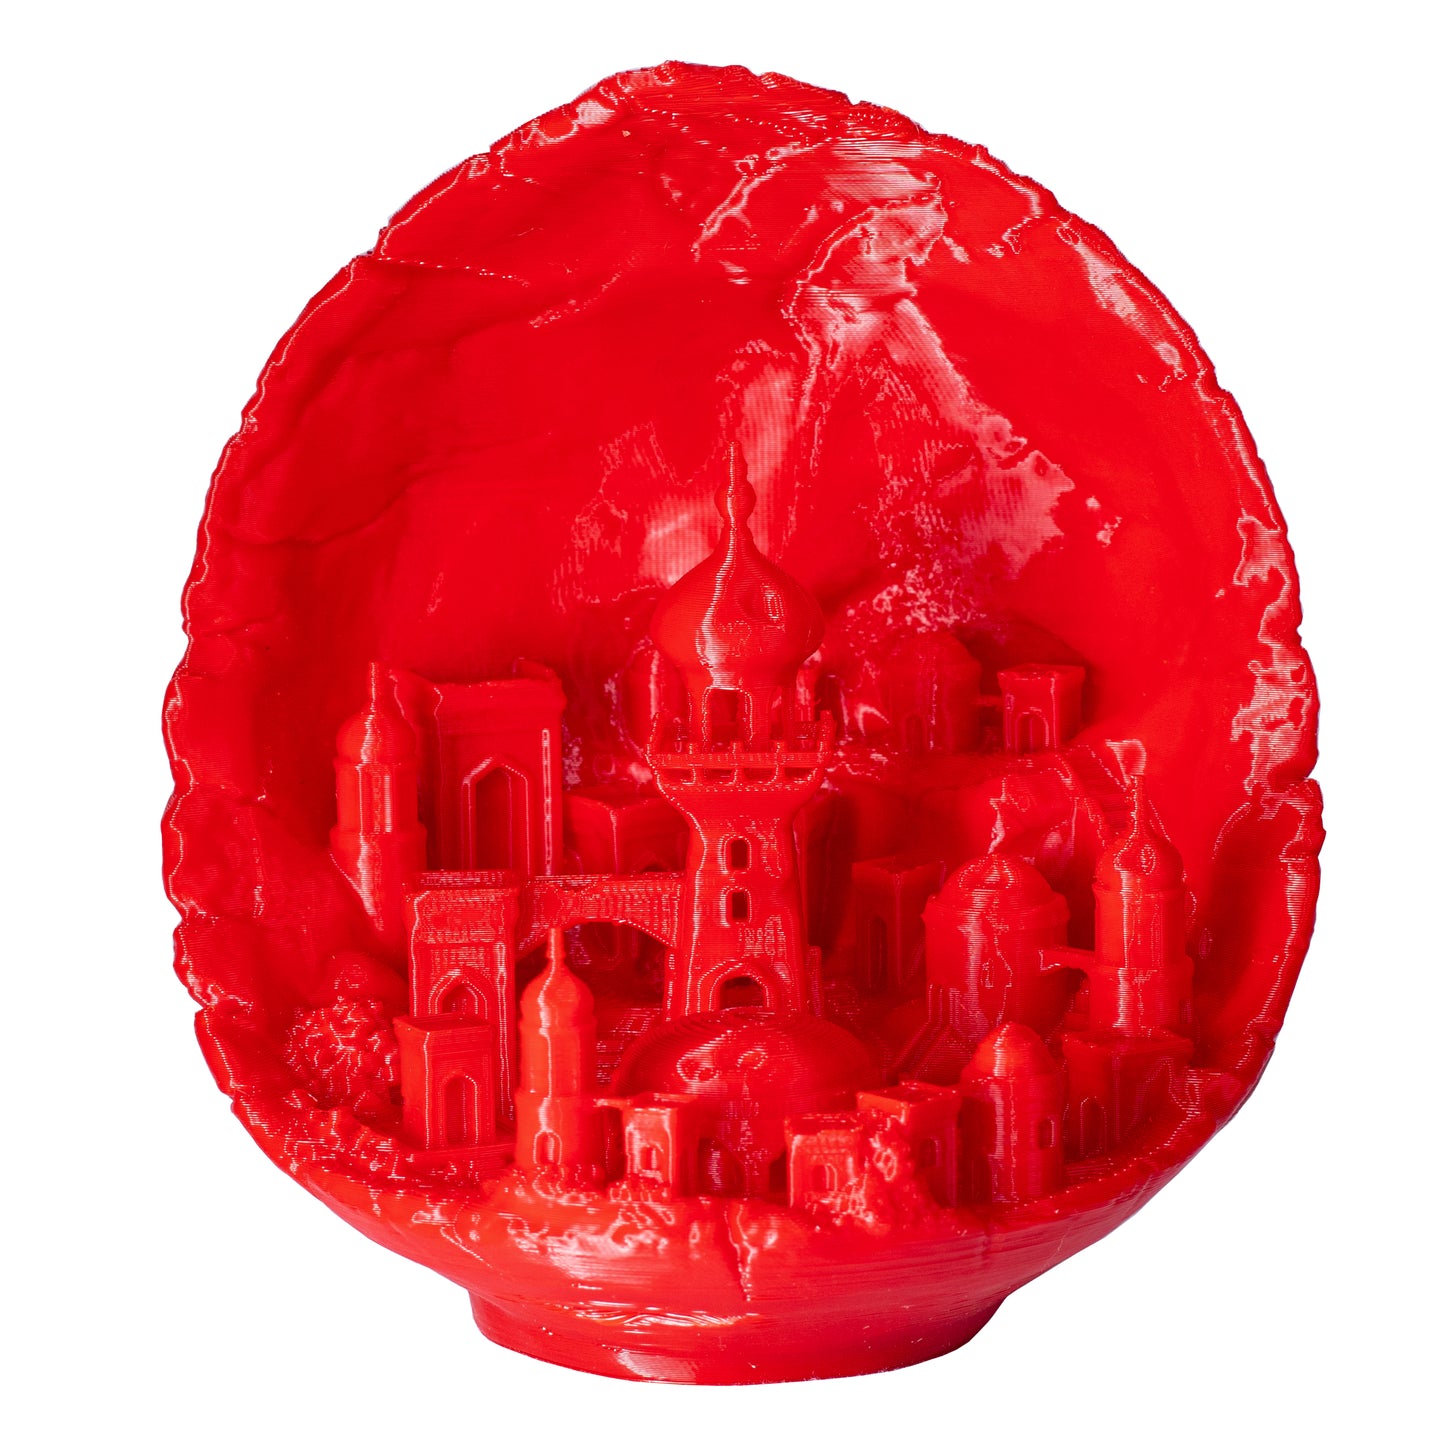 VOXELPLA PLA 1.75mm Red for 3D printing Test Print 1